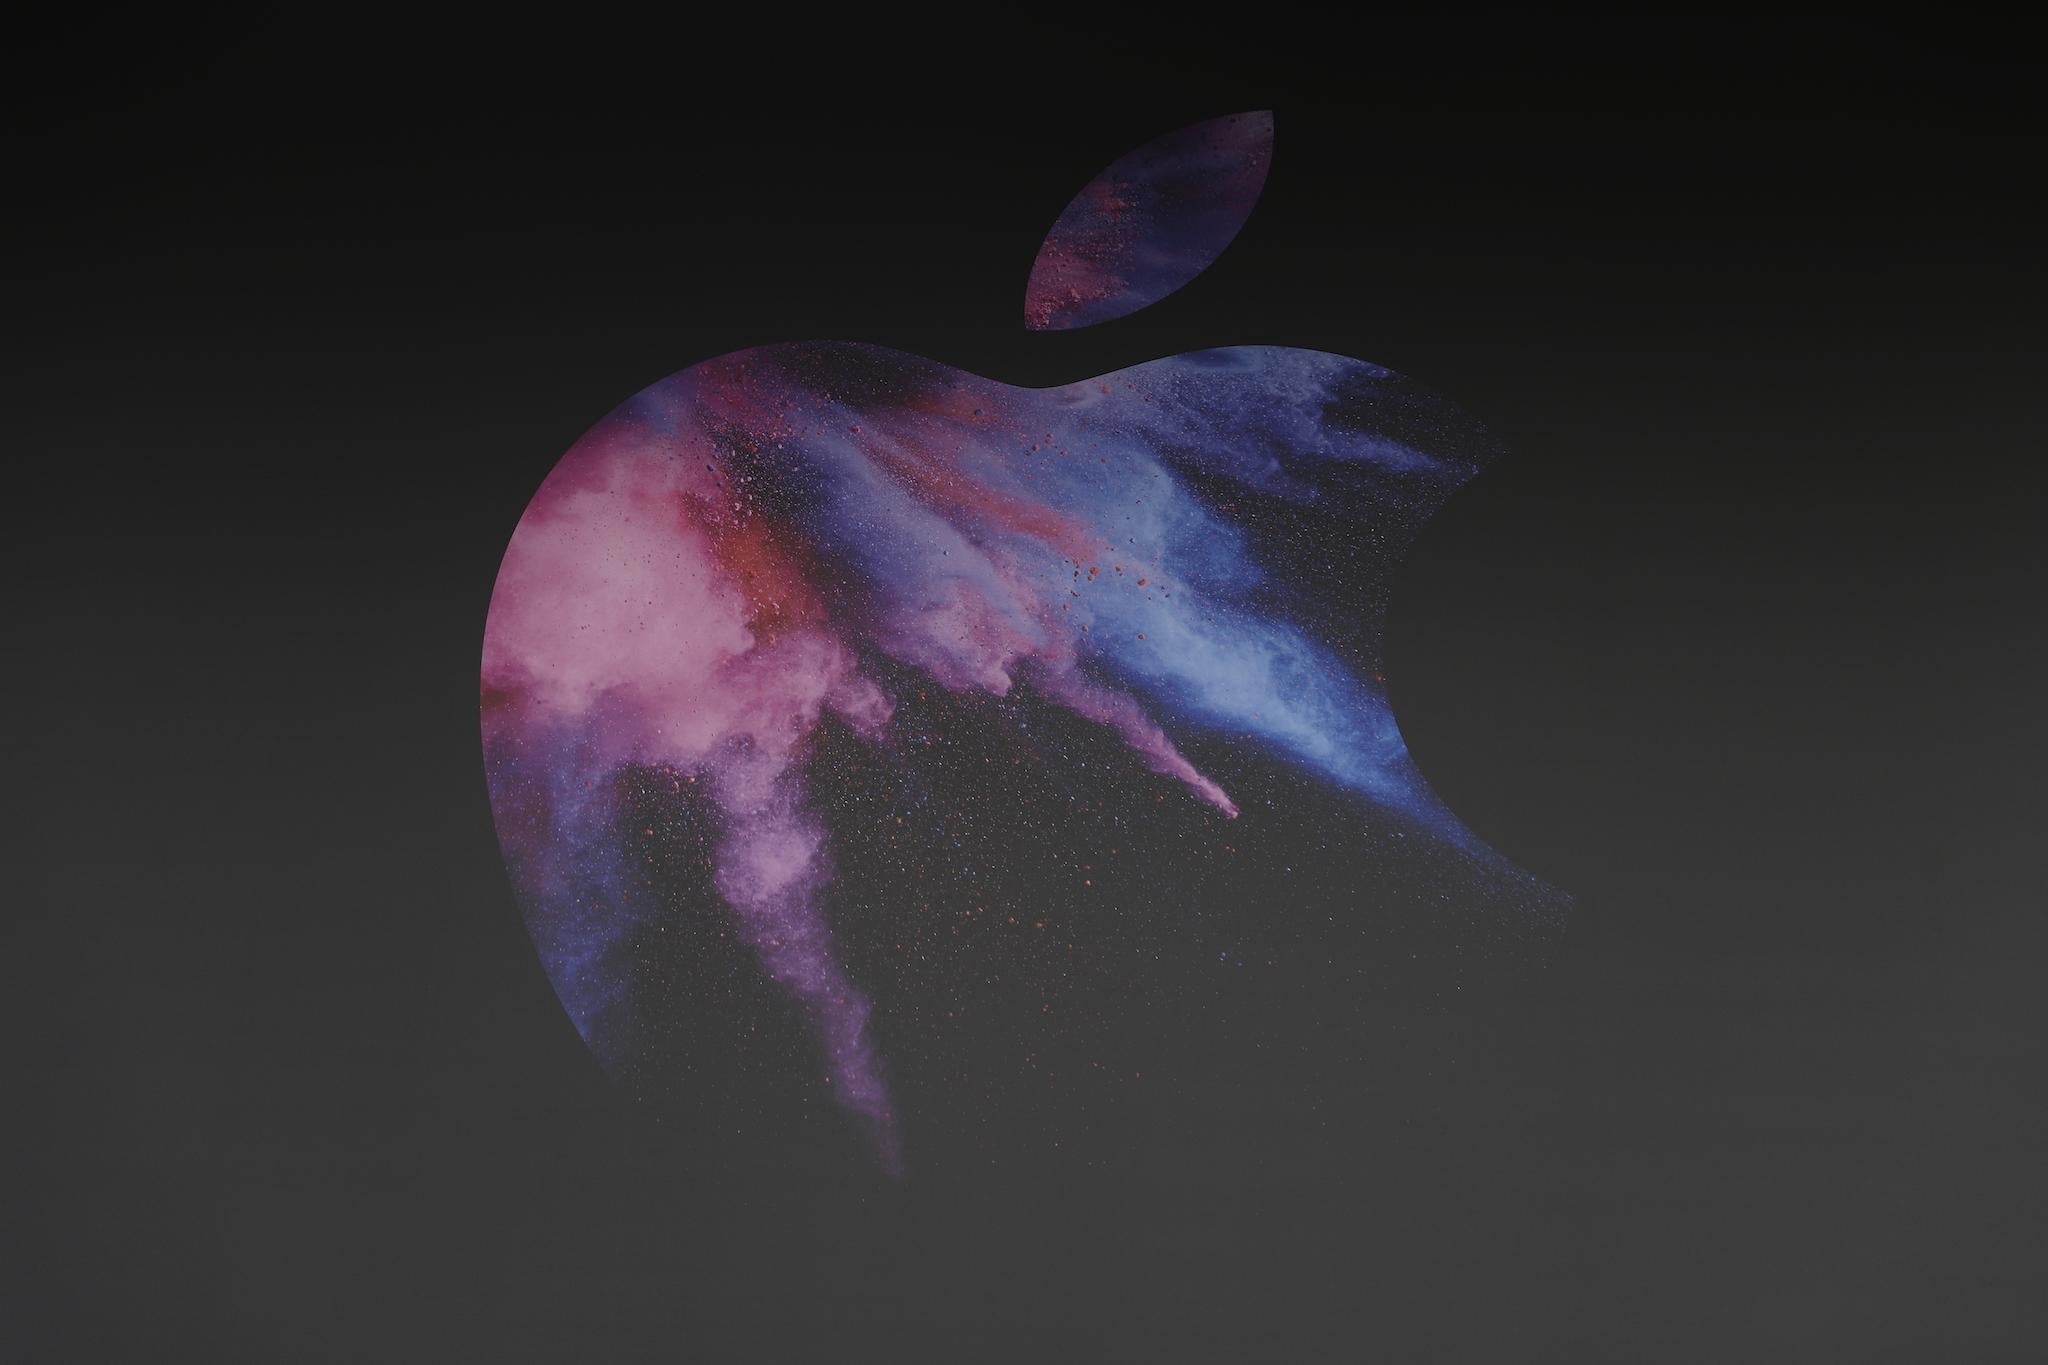 An Apple logo is seen on a building during a product launch event on October 27, 2016 in Cupertino, California